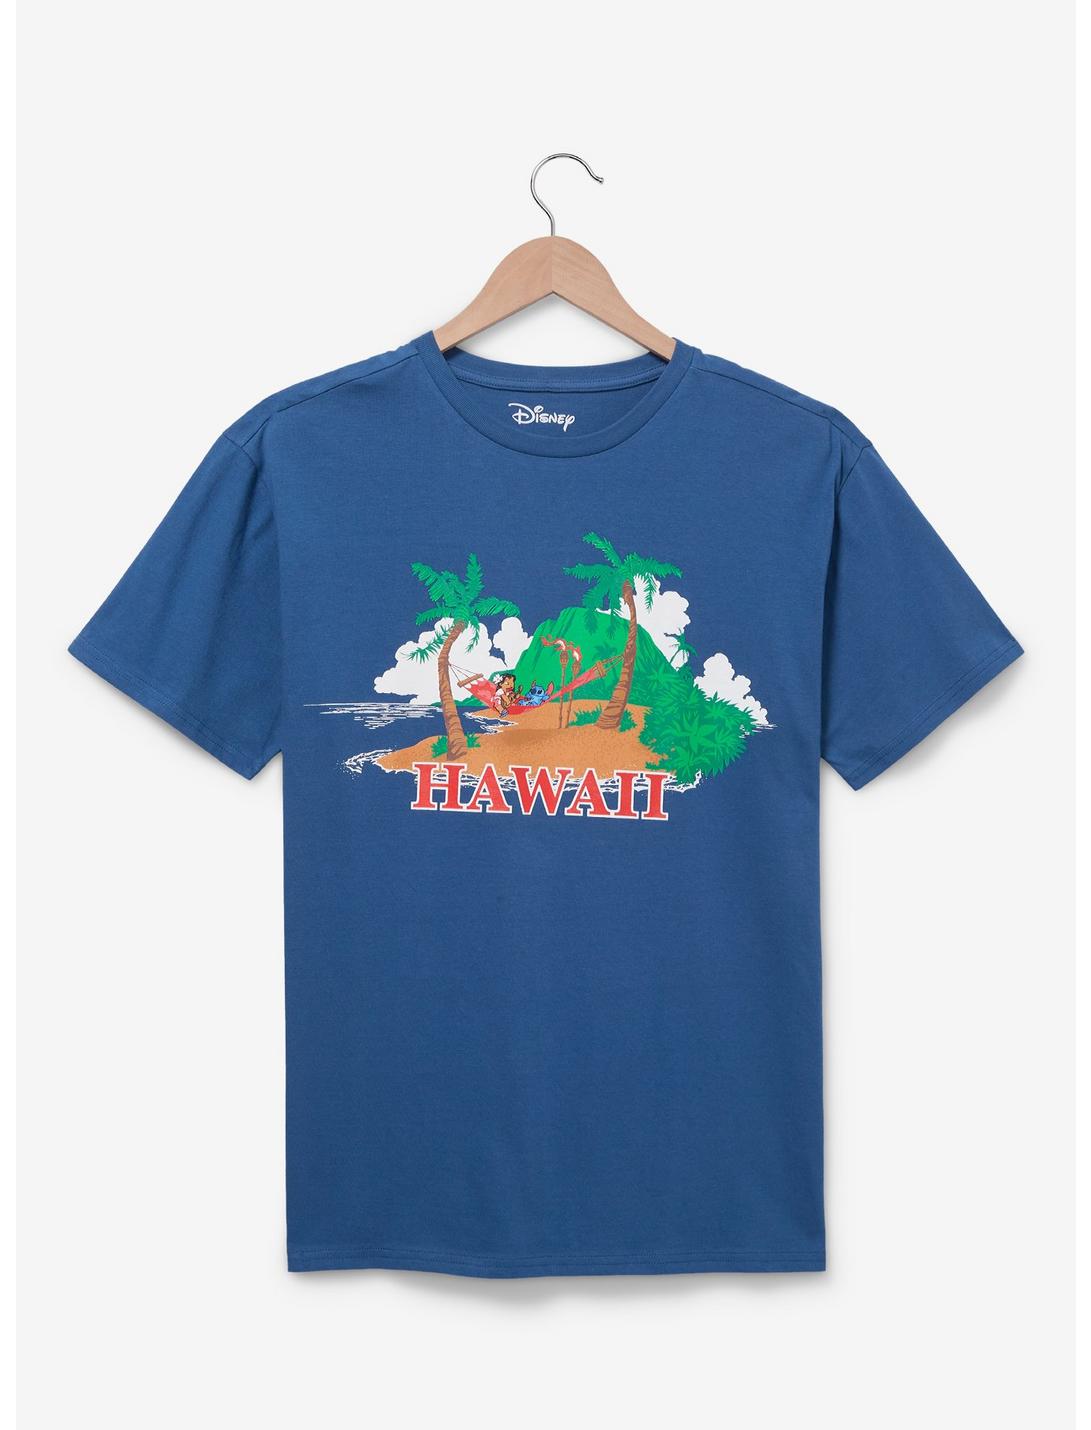 Disney Lilo & Stitch Hawaii Scenic T-Shirt - BoxLunch Exclusive, ROYAL, hi-res